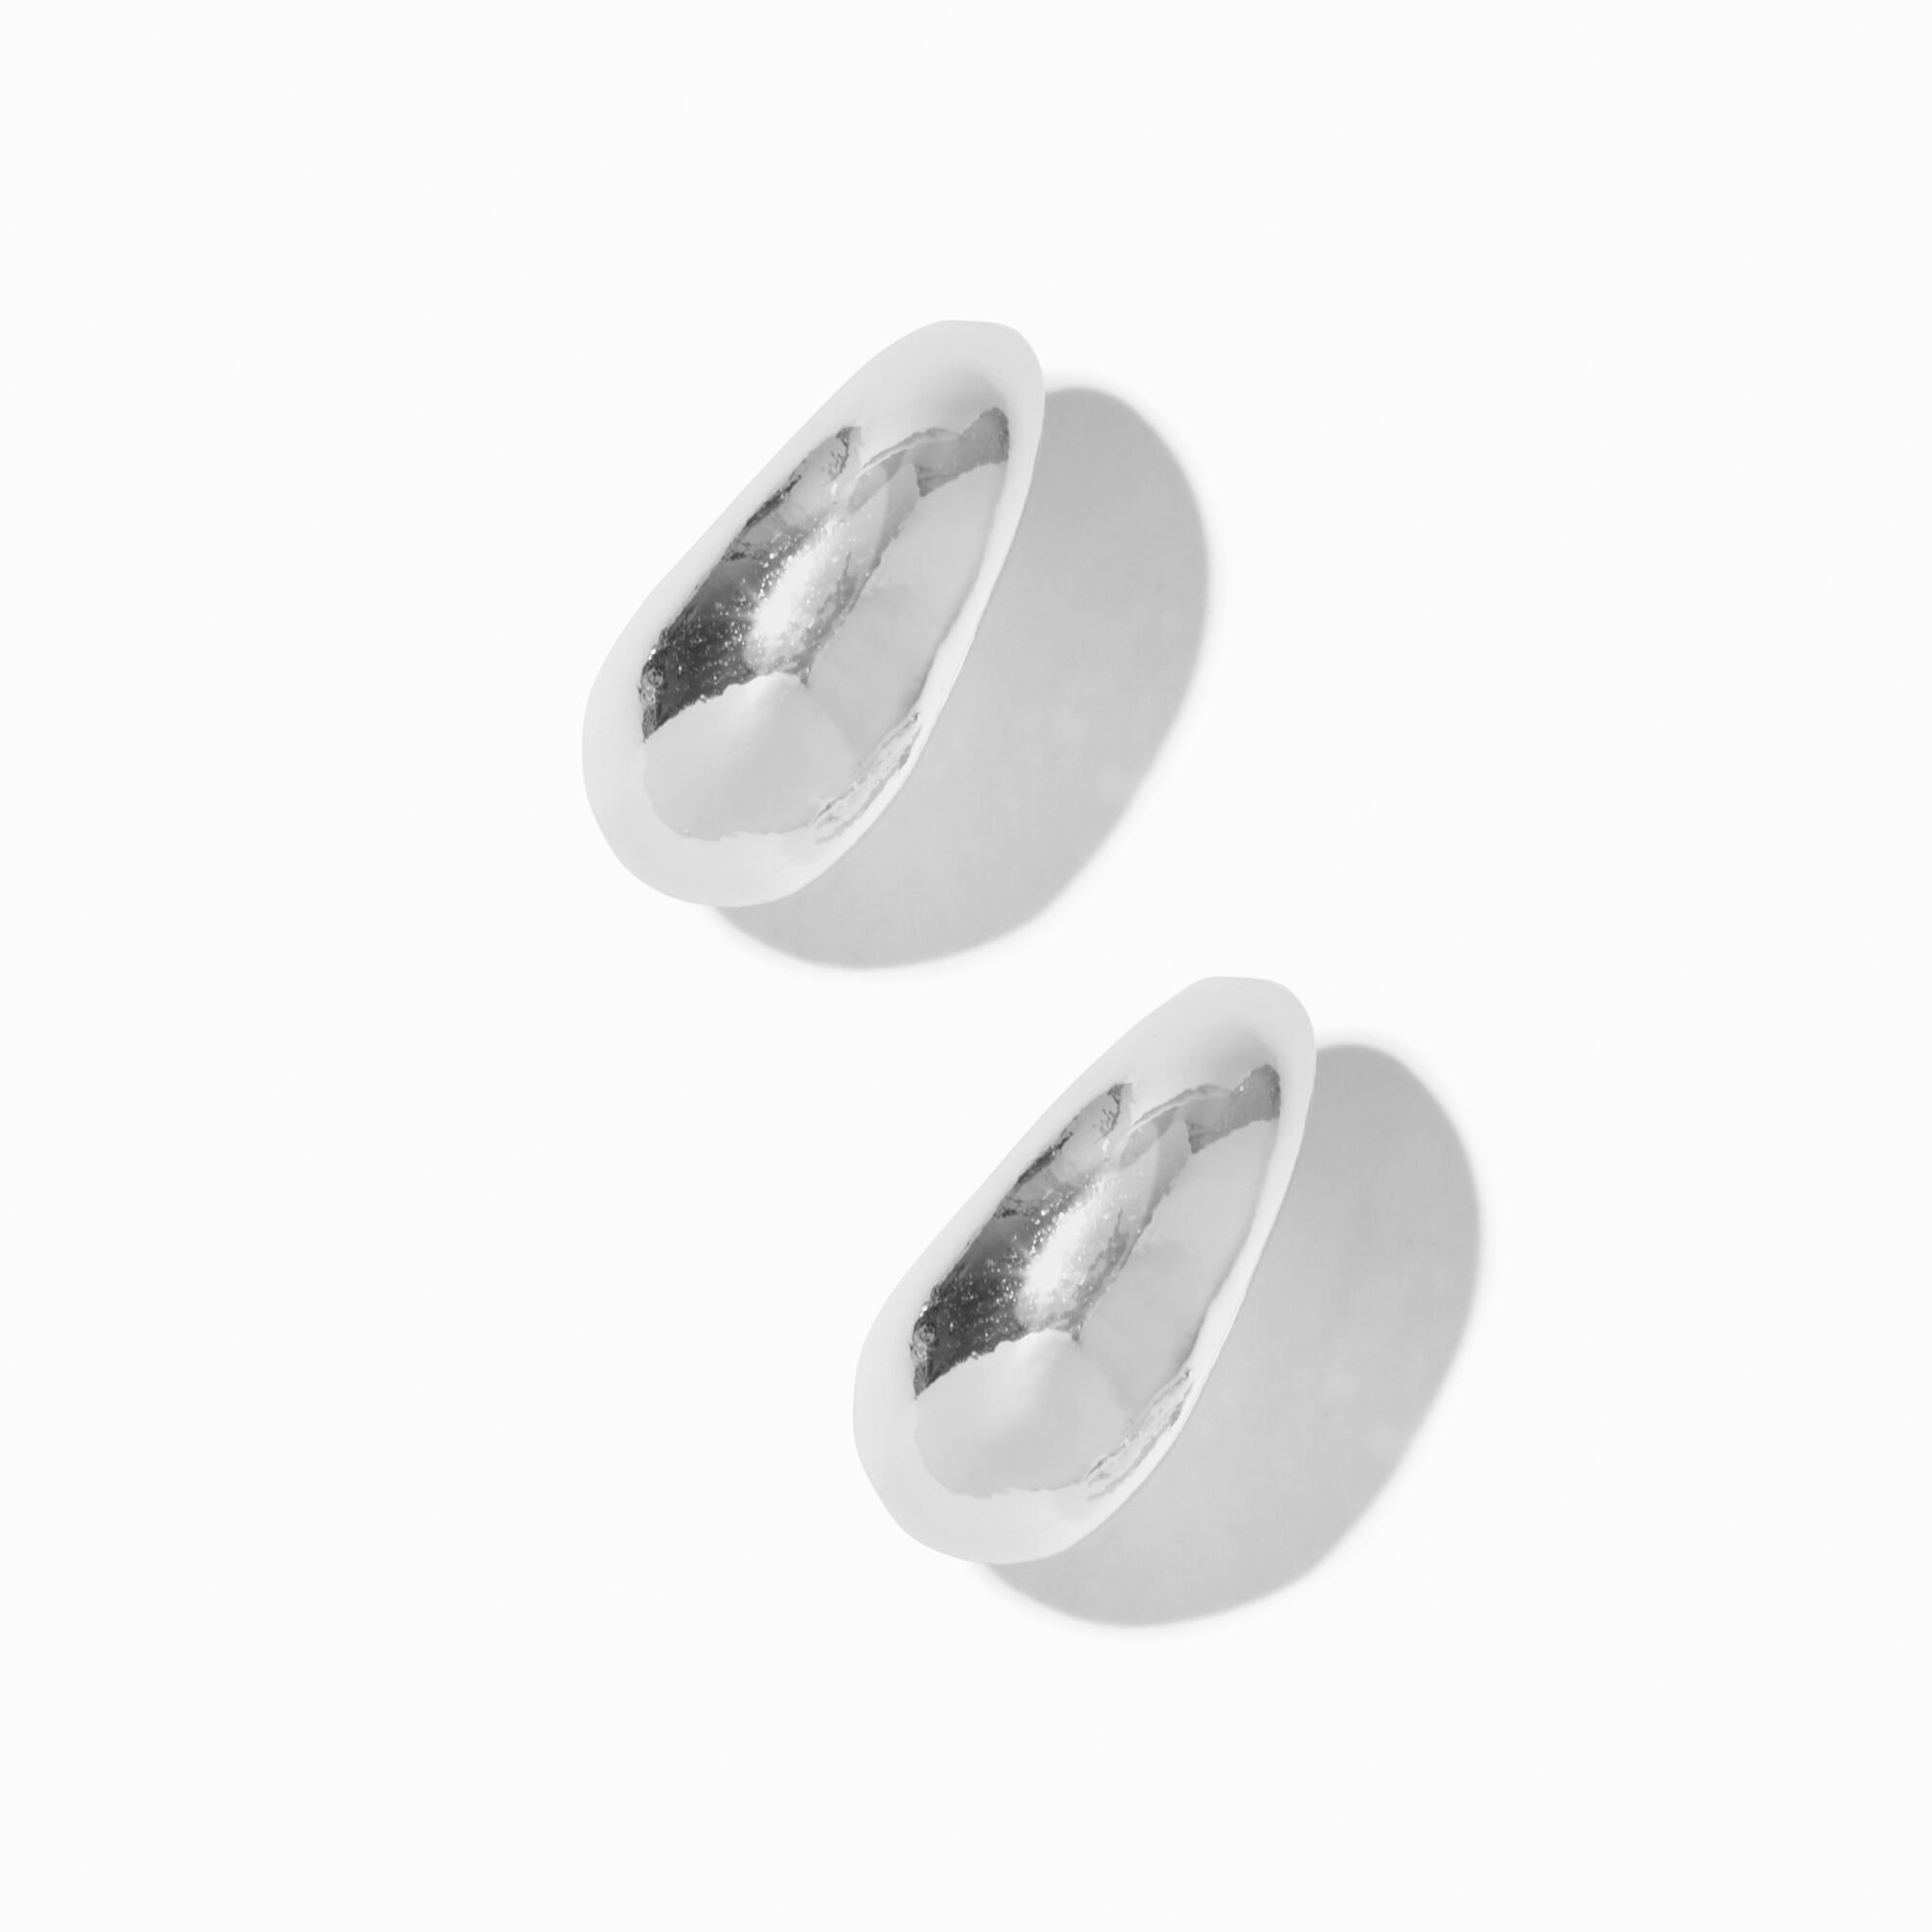 View Claires Tone Bean 15MM Hoop Earrings Silver information